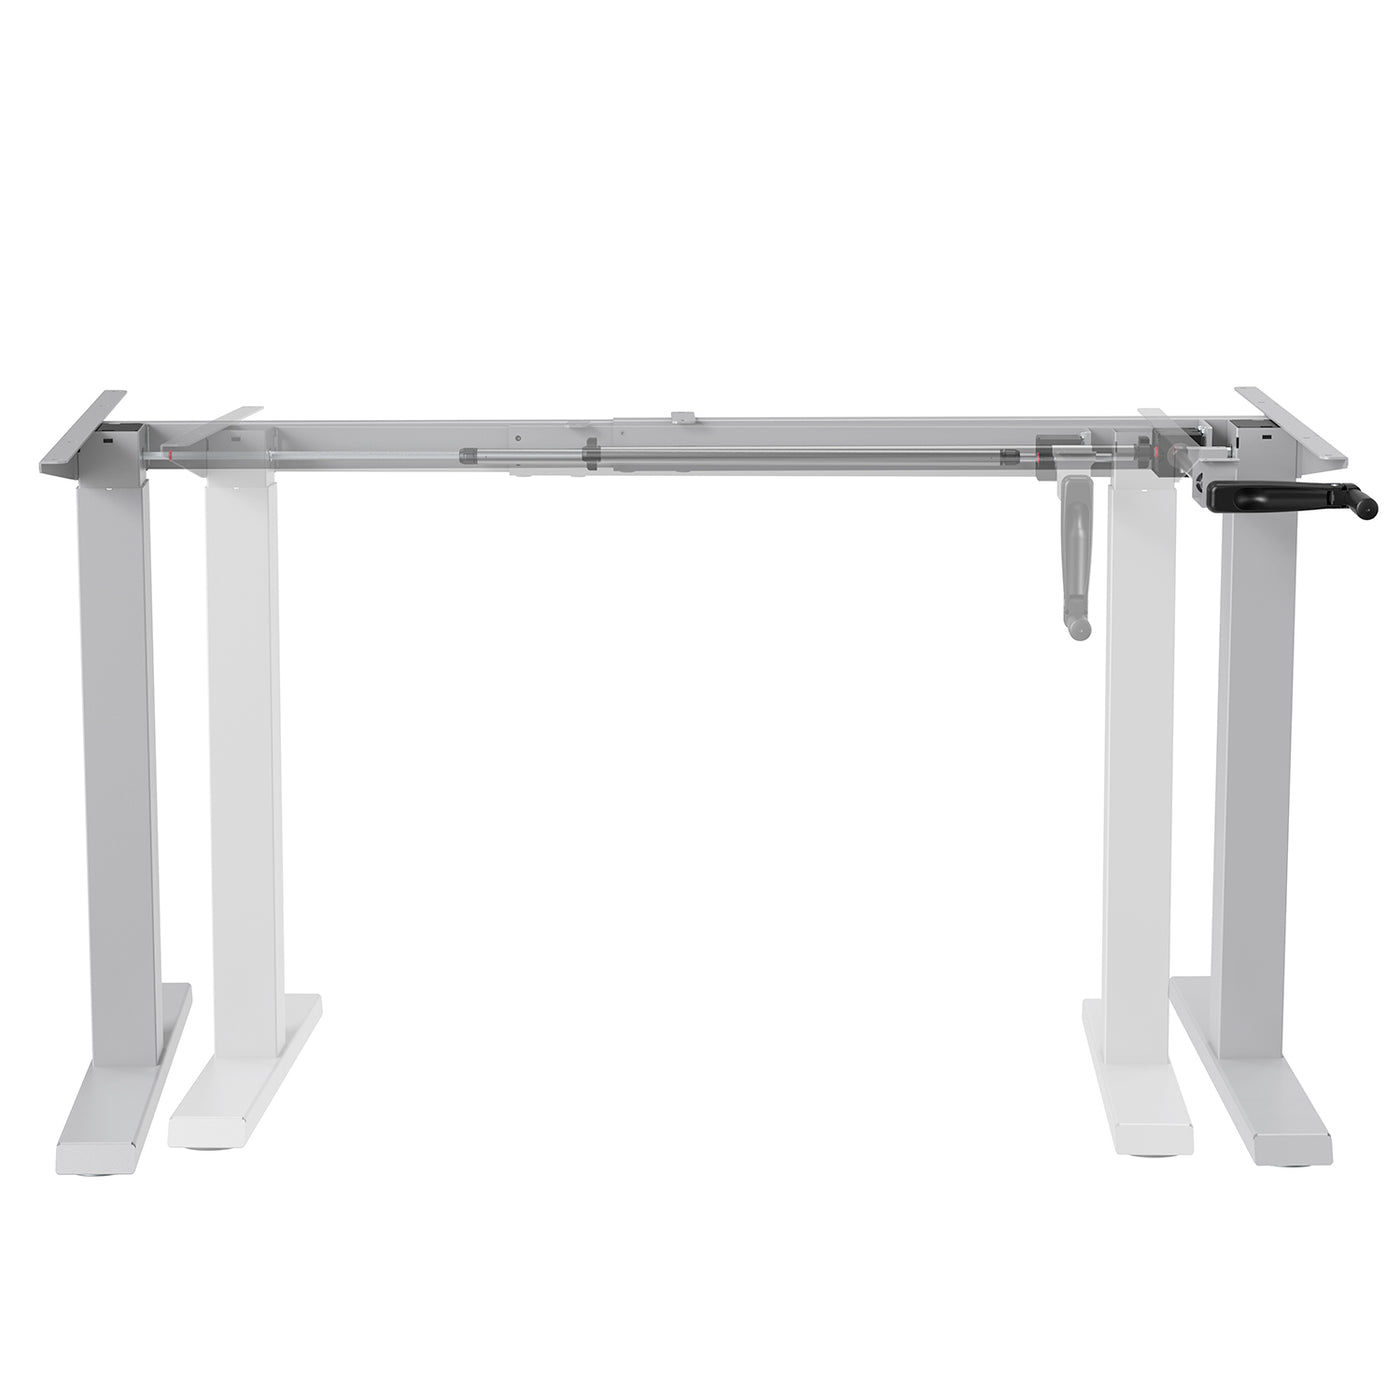 Ergo Office ER-402W Manual Height Adjustment Desk Table Frame Without Top for Standing and Sitting Work White